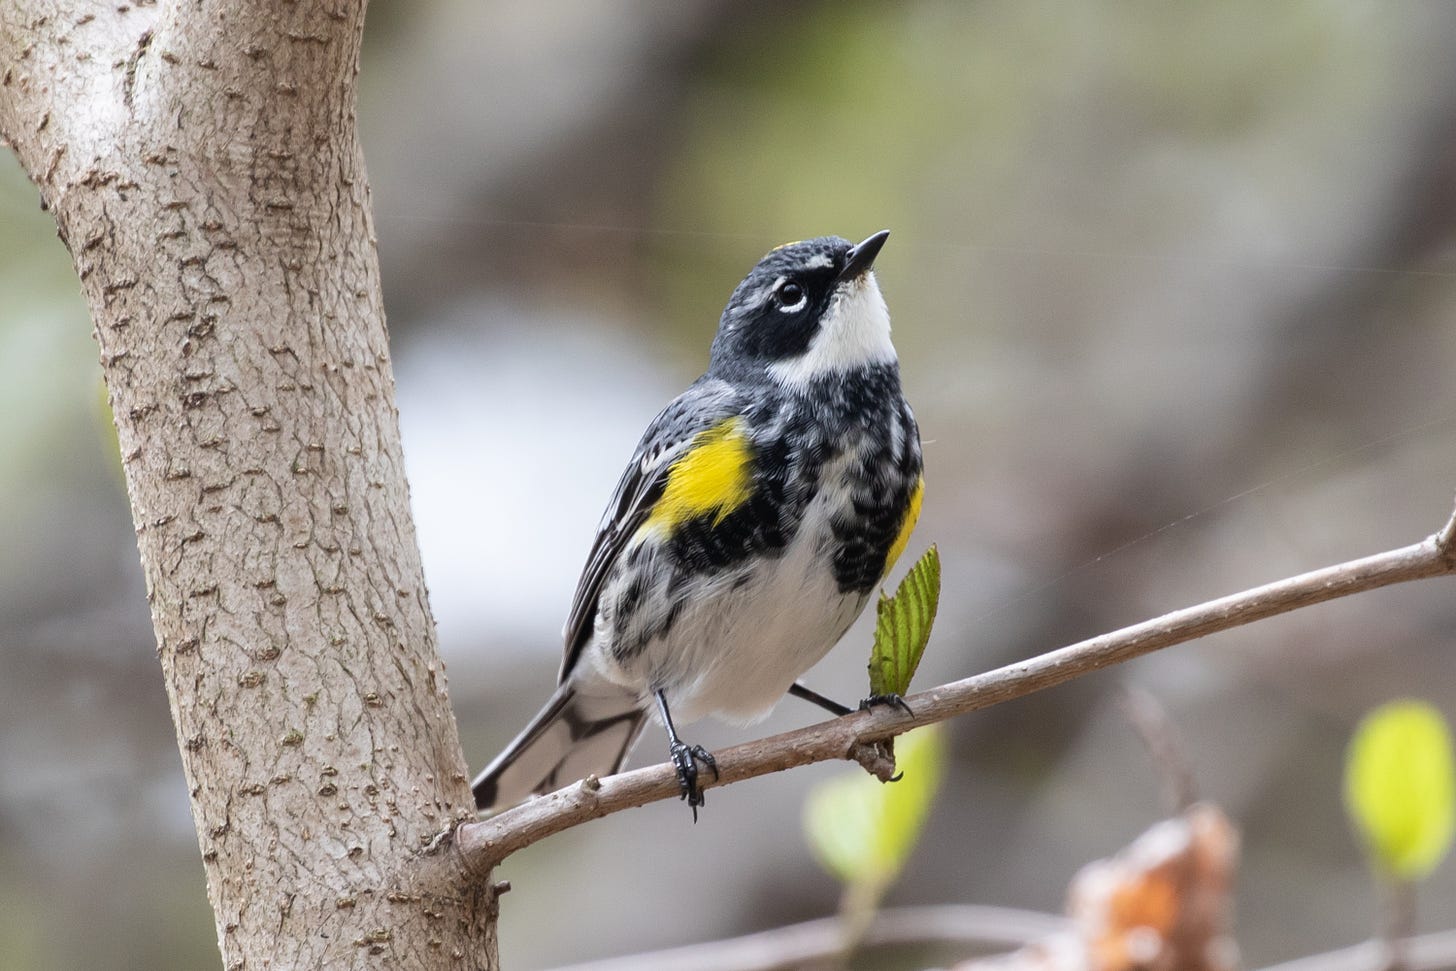 a gray little bird with a black raccoon mask, white throat, yellow shoulders and a black breast and white belly, perched on a thin limb